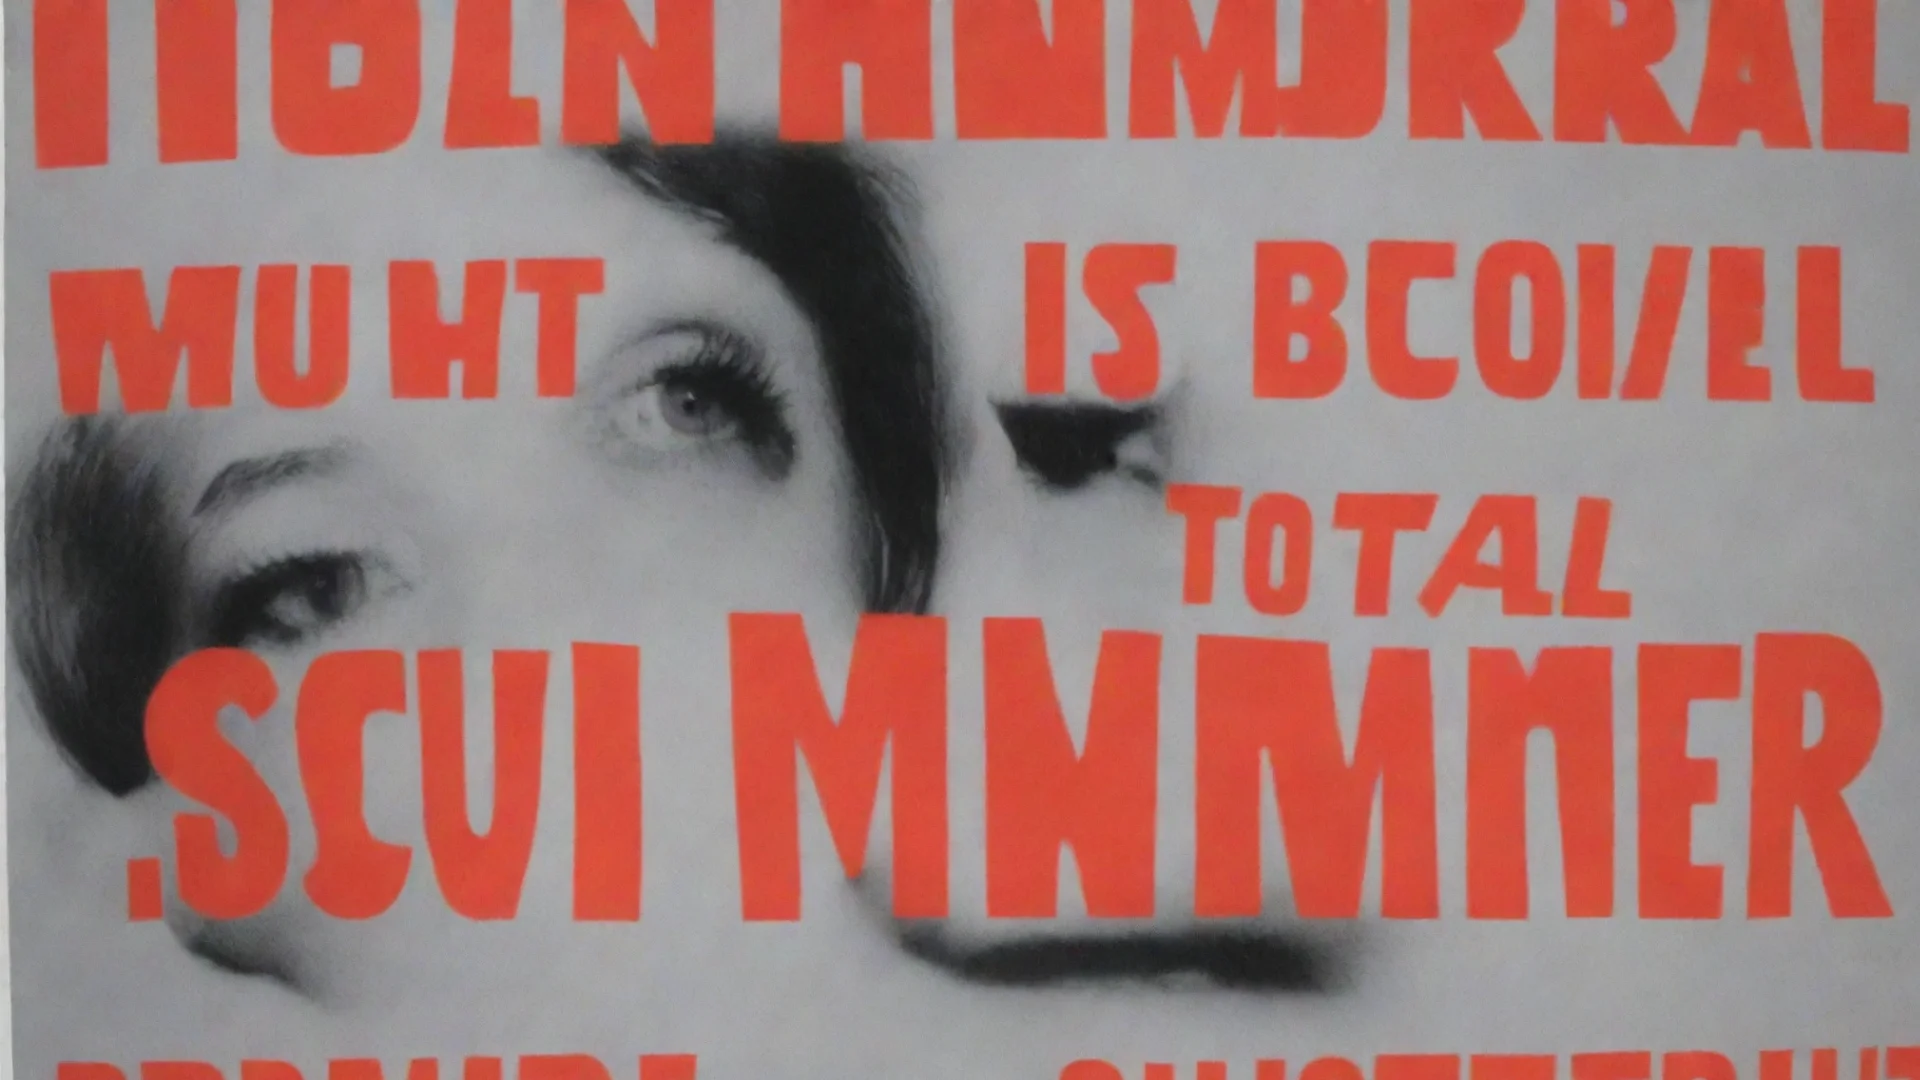 amazing barbara kruger poster that says total bummer summer awesome portrait 2 wide